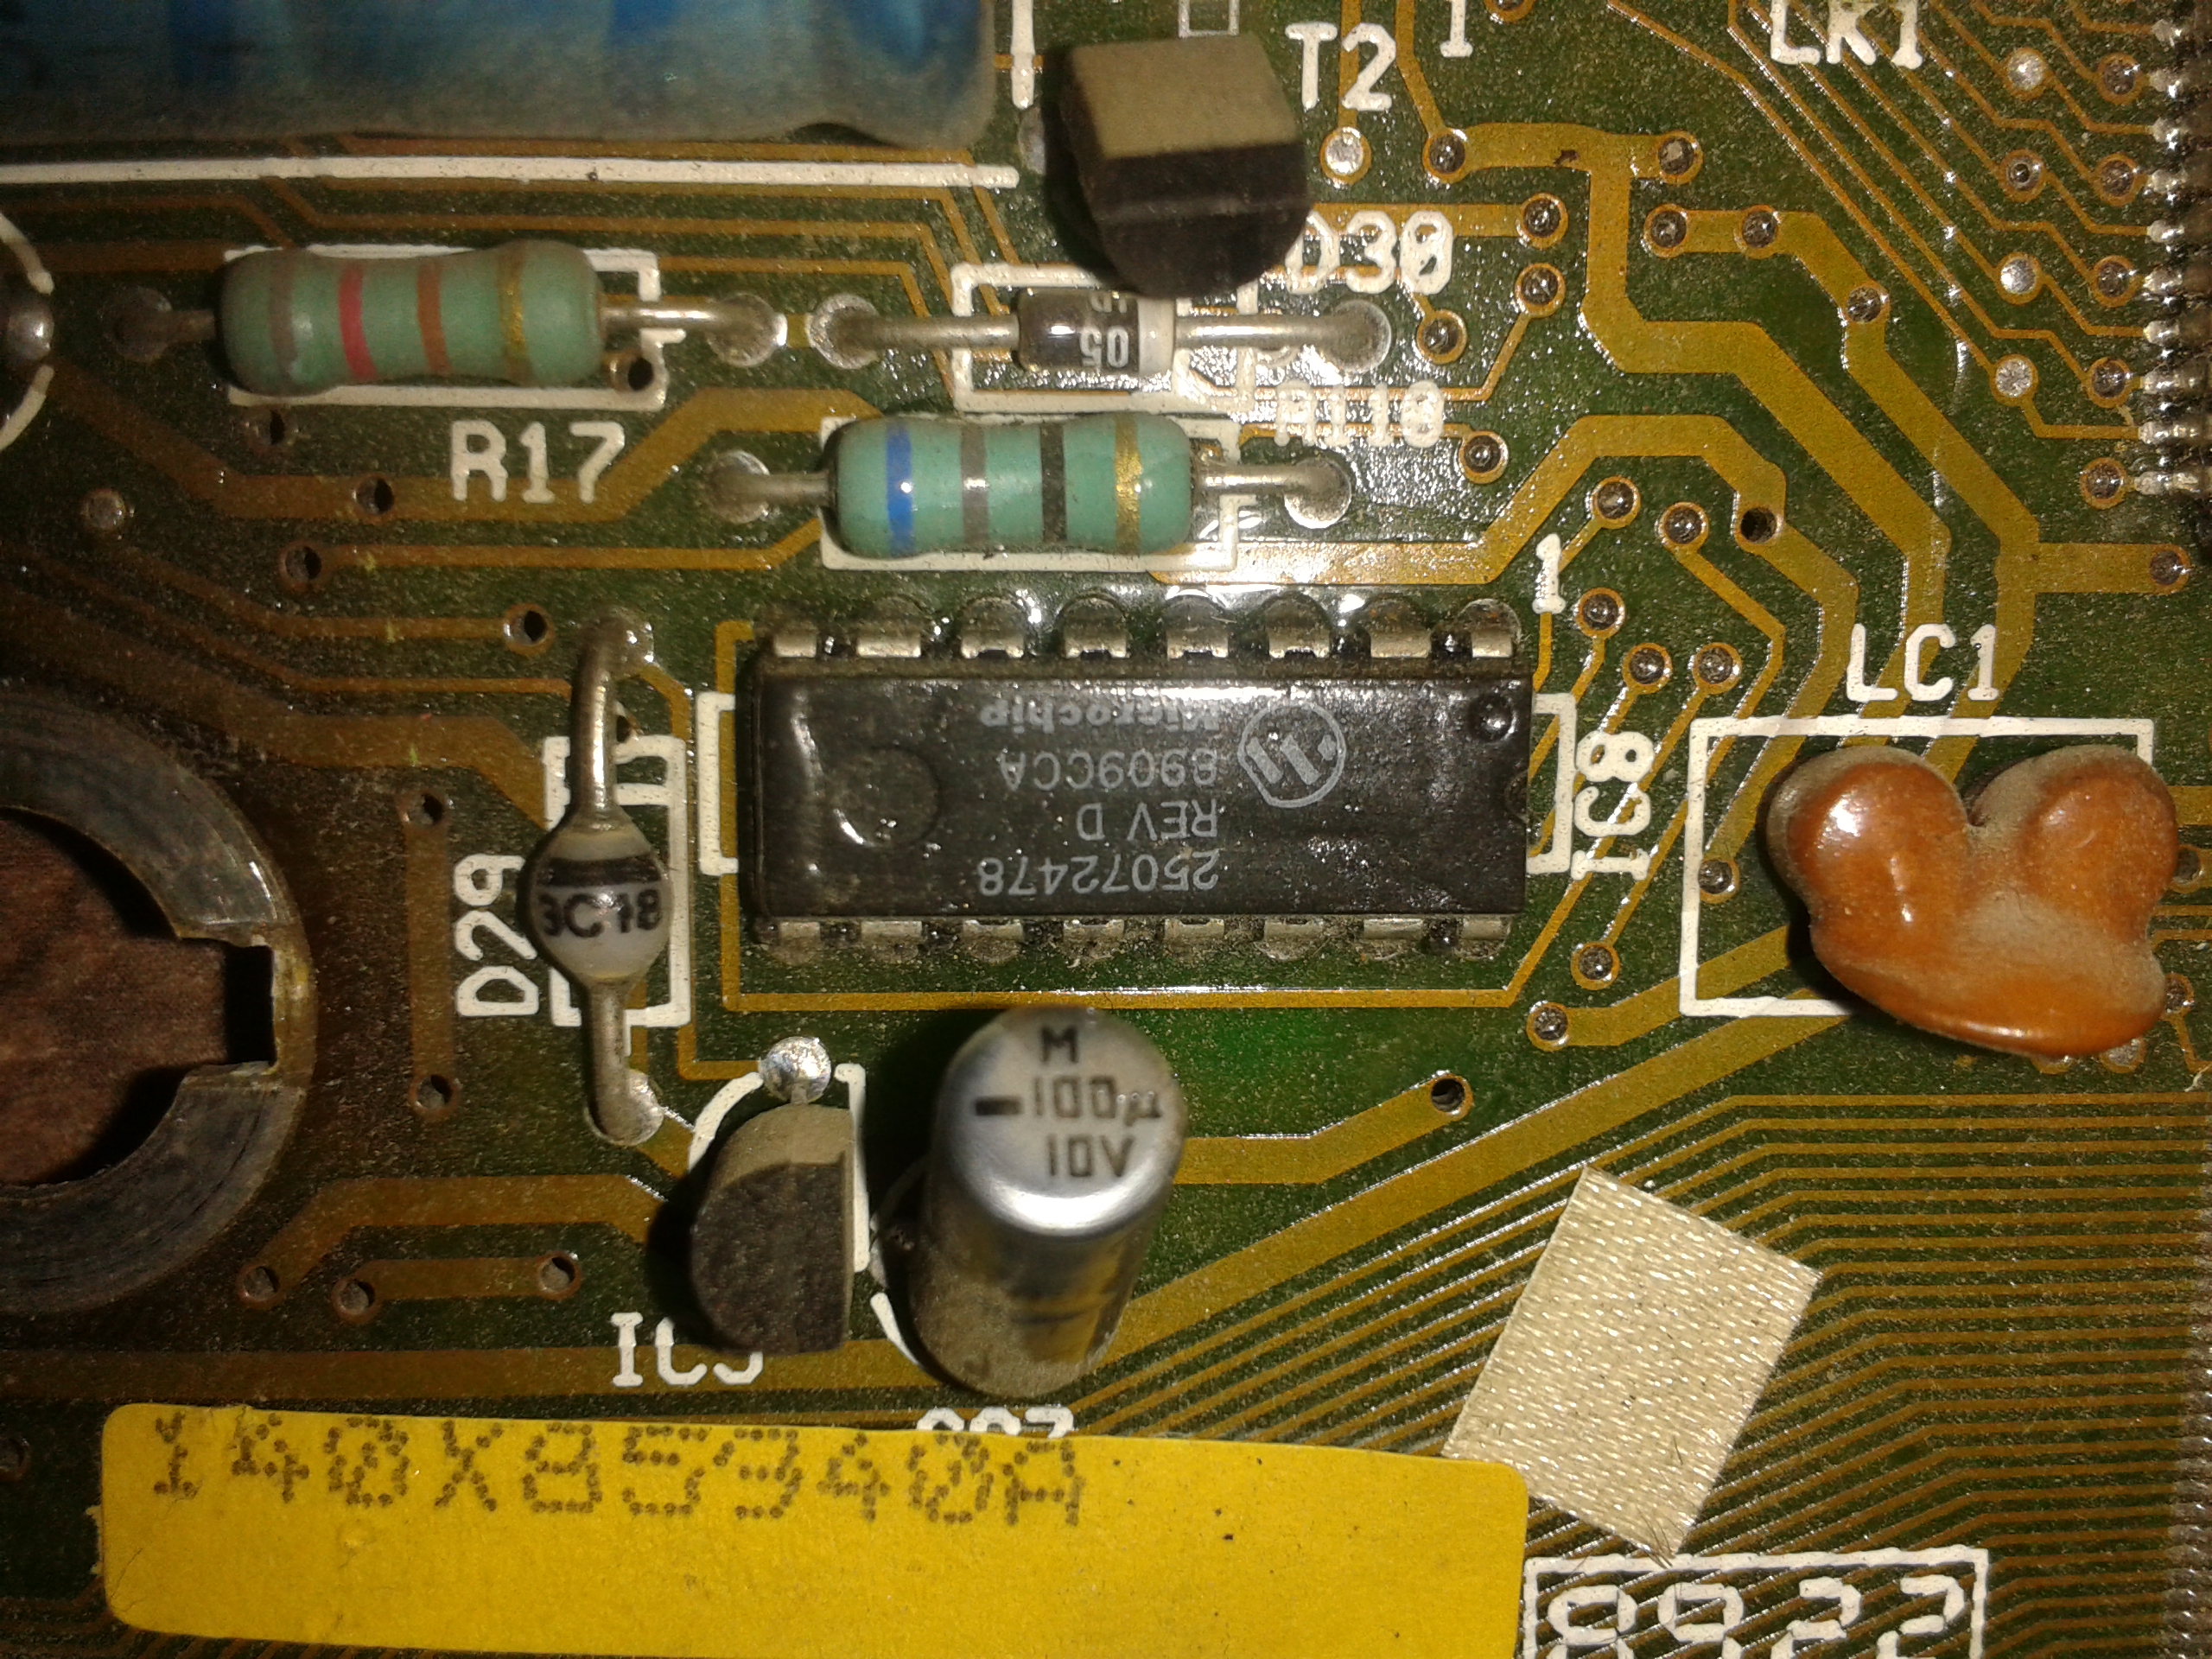 close up of IC8 on front of PCB